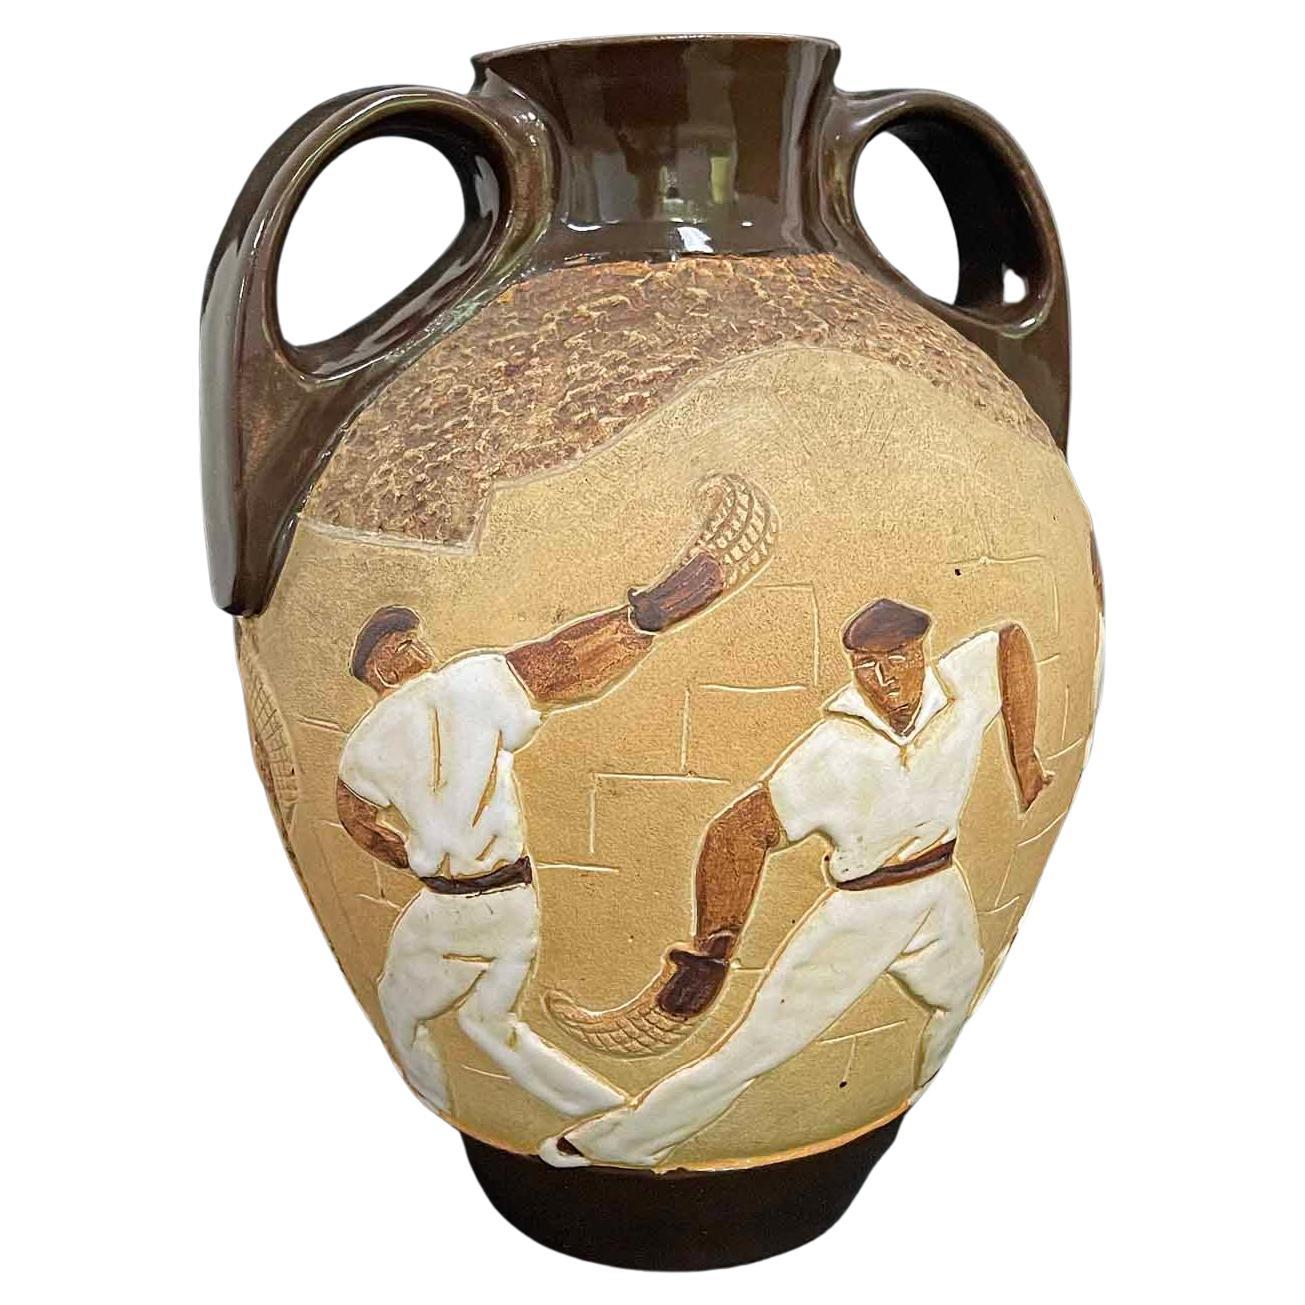 "Playing Pelota in the Basque Region", Exceptional Art Deco Vase by Ciboure For Sale